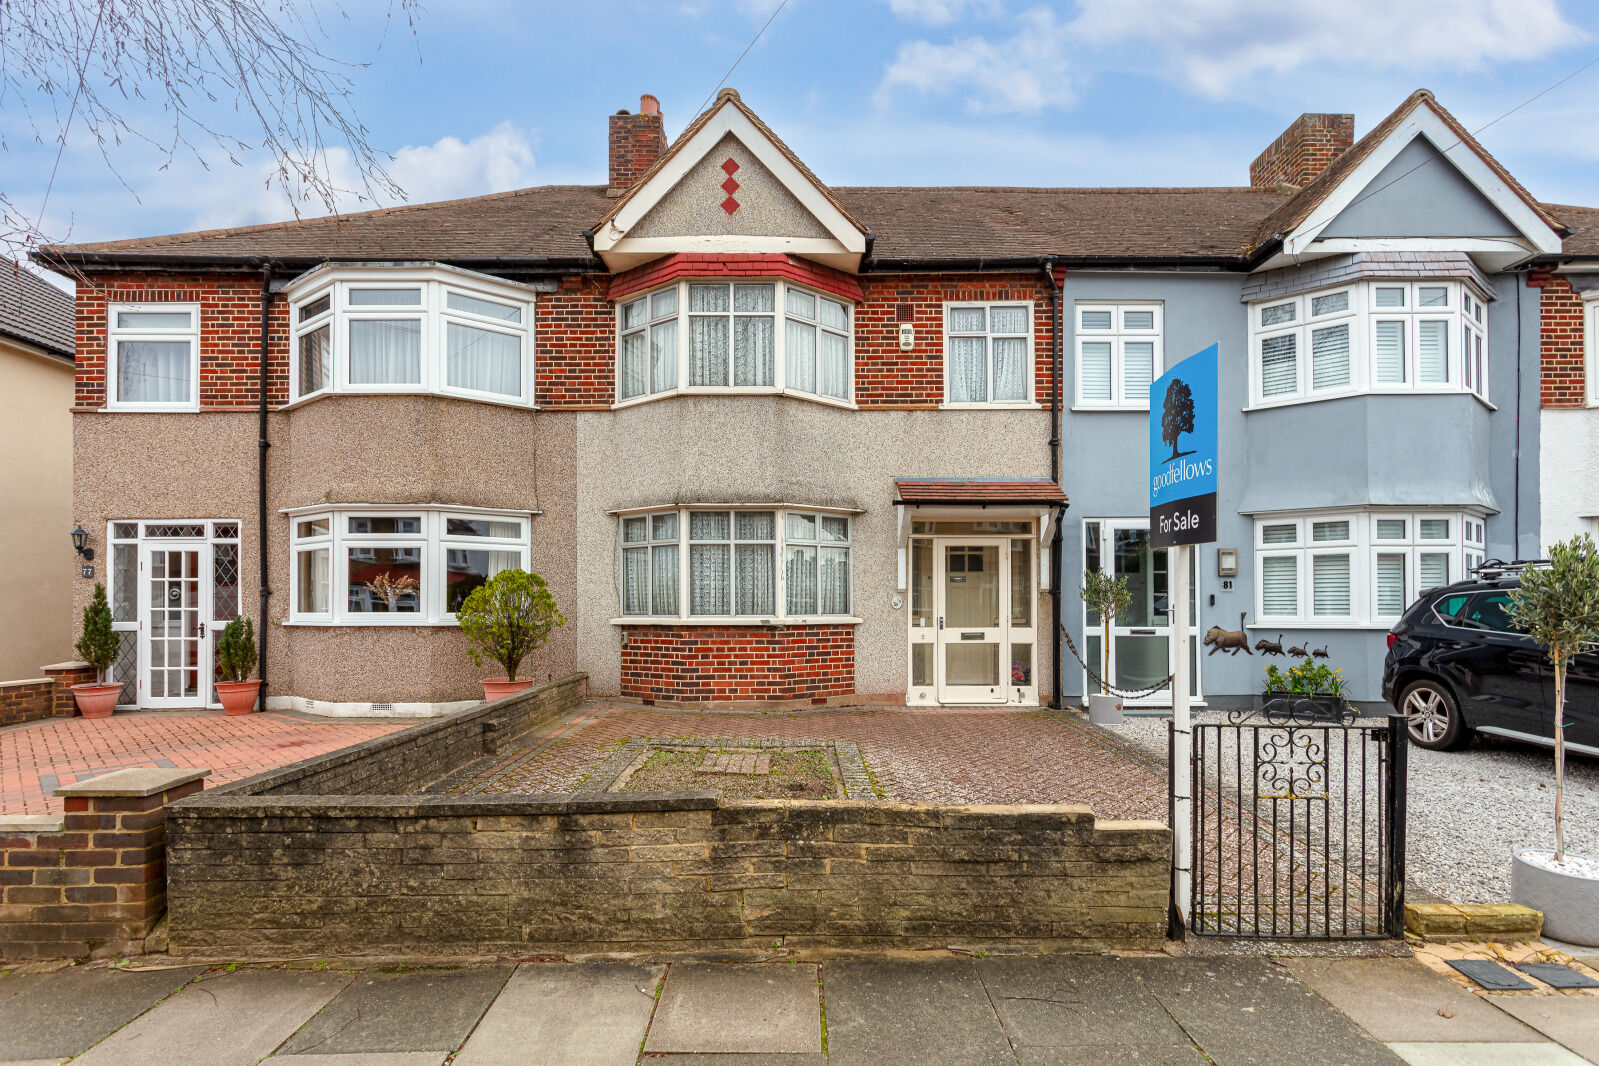 3 bedroom mid terraced house for sale Monkleigh Road, Morden, SM4, main image